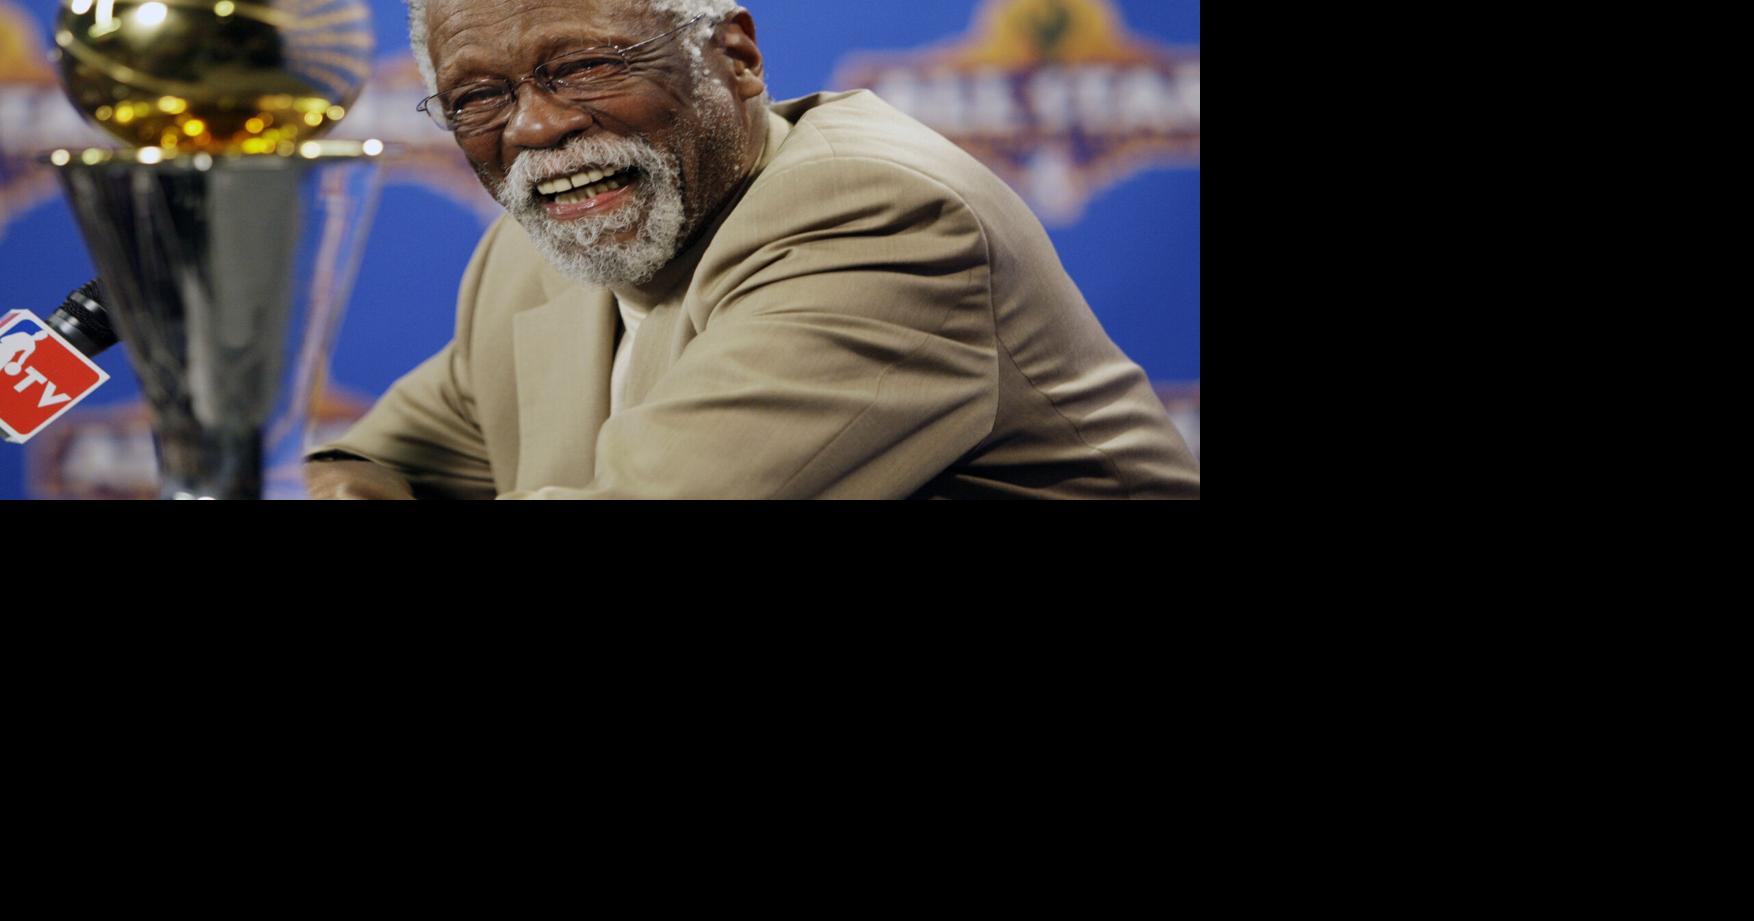 Why was Boston Garden nearly empty when Bill Russell's number was retired  in 1972? - The Boston Globe